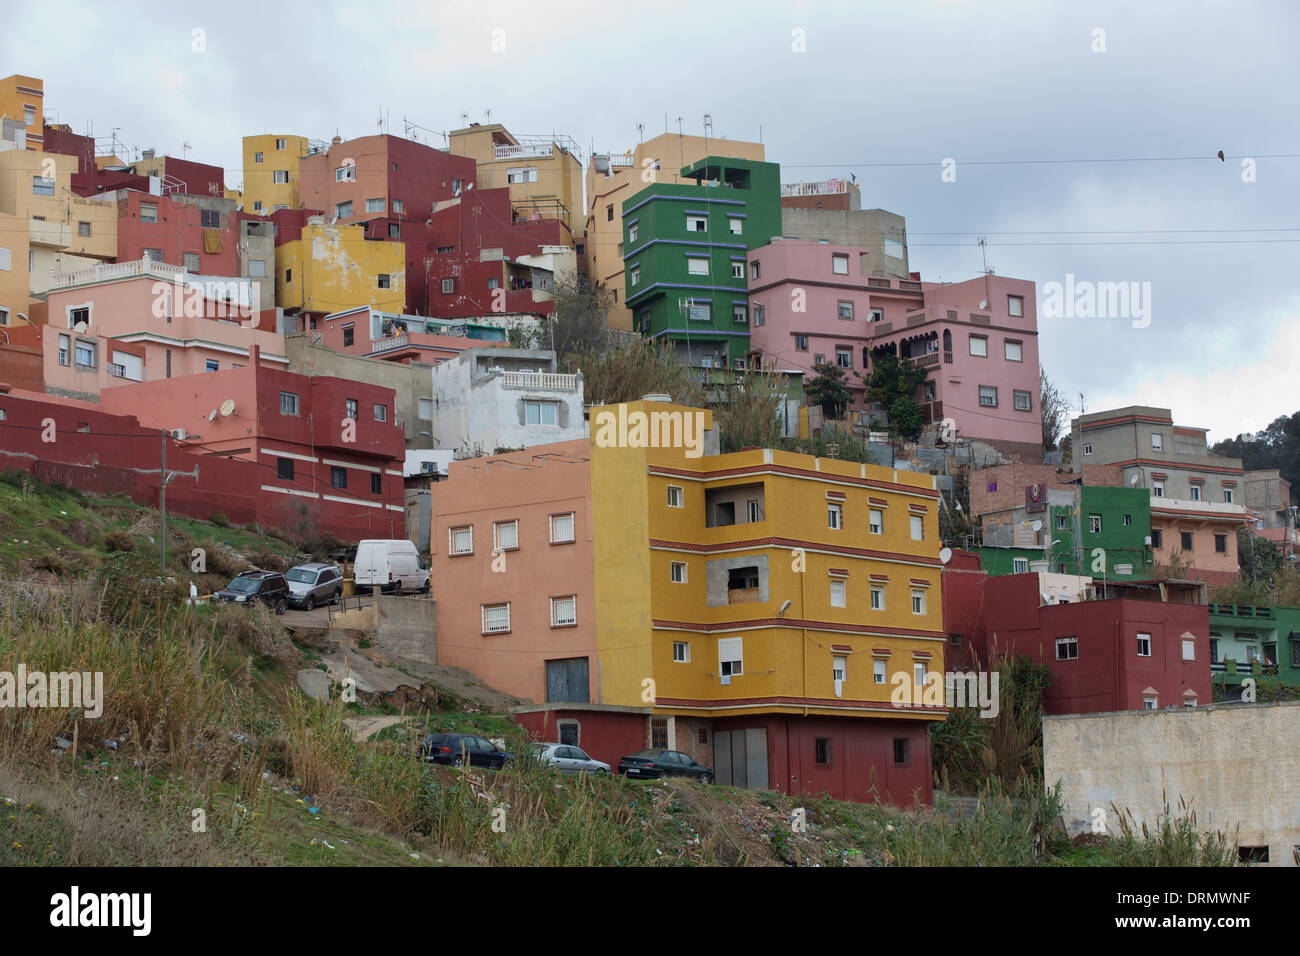 Principe neighbourhood in the south of the Spanish exclave city of Ceuta, in northwest Africa. Stock Photo